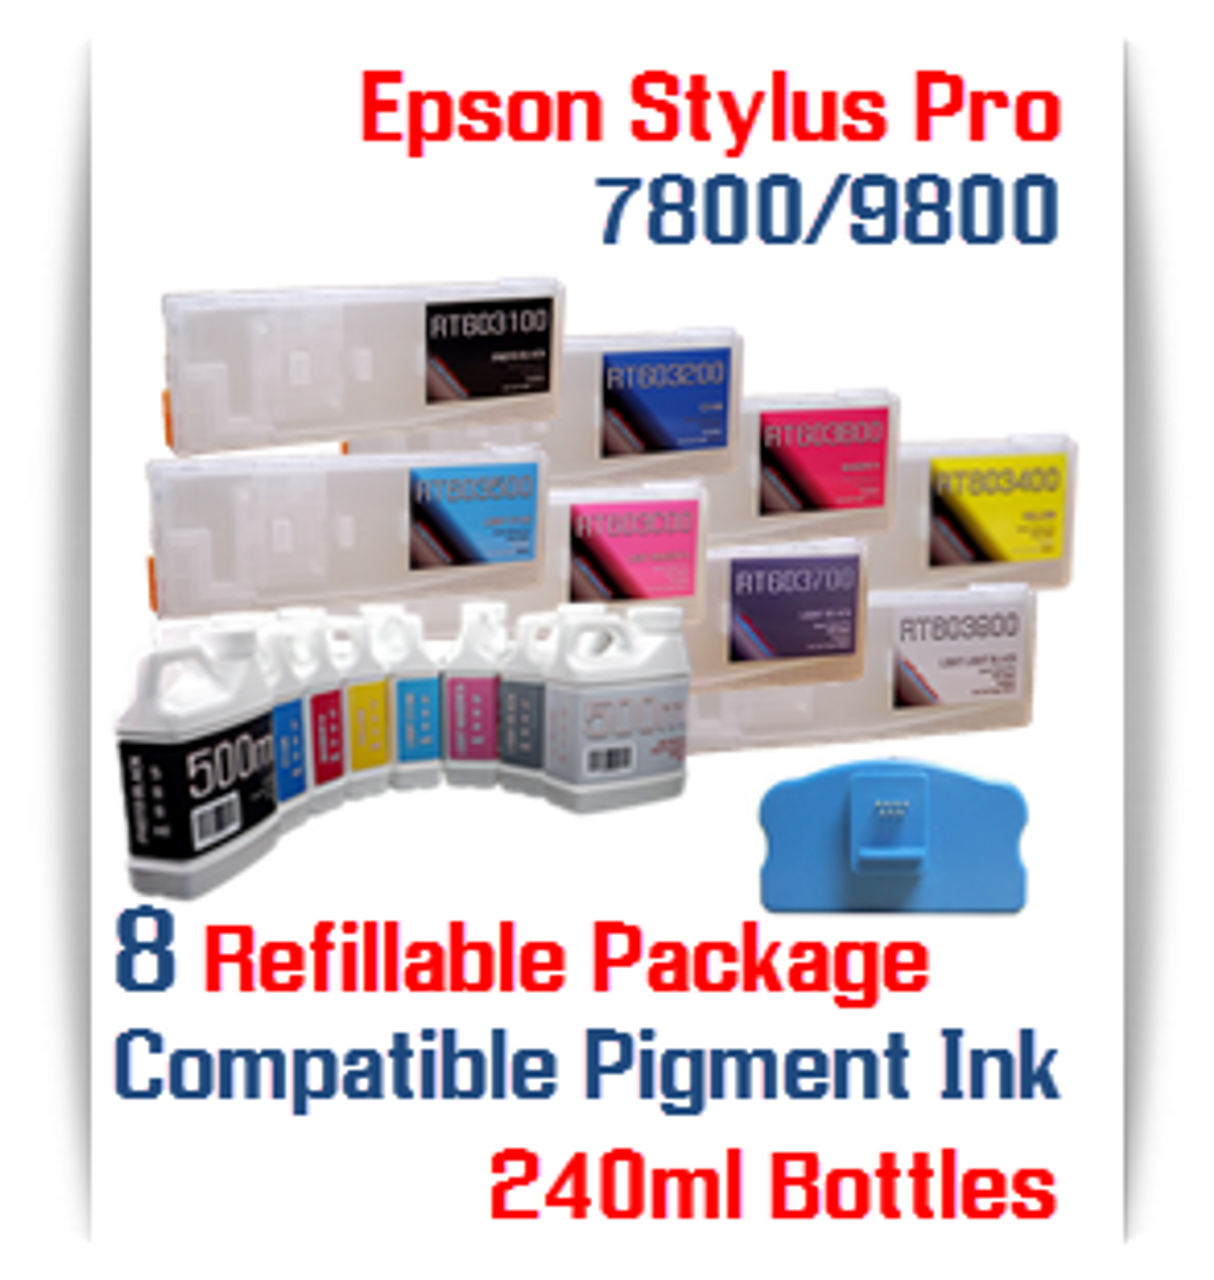 8 Refillable Ink Cartridge Package with Ink and Chip Re-Setter Epson Stylus Pro 7800, 9800 350ml Cartridges